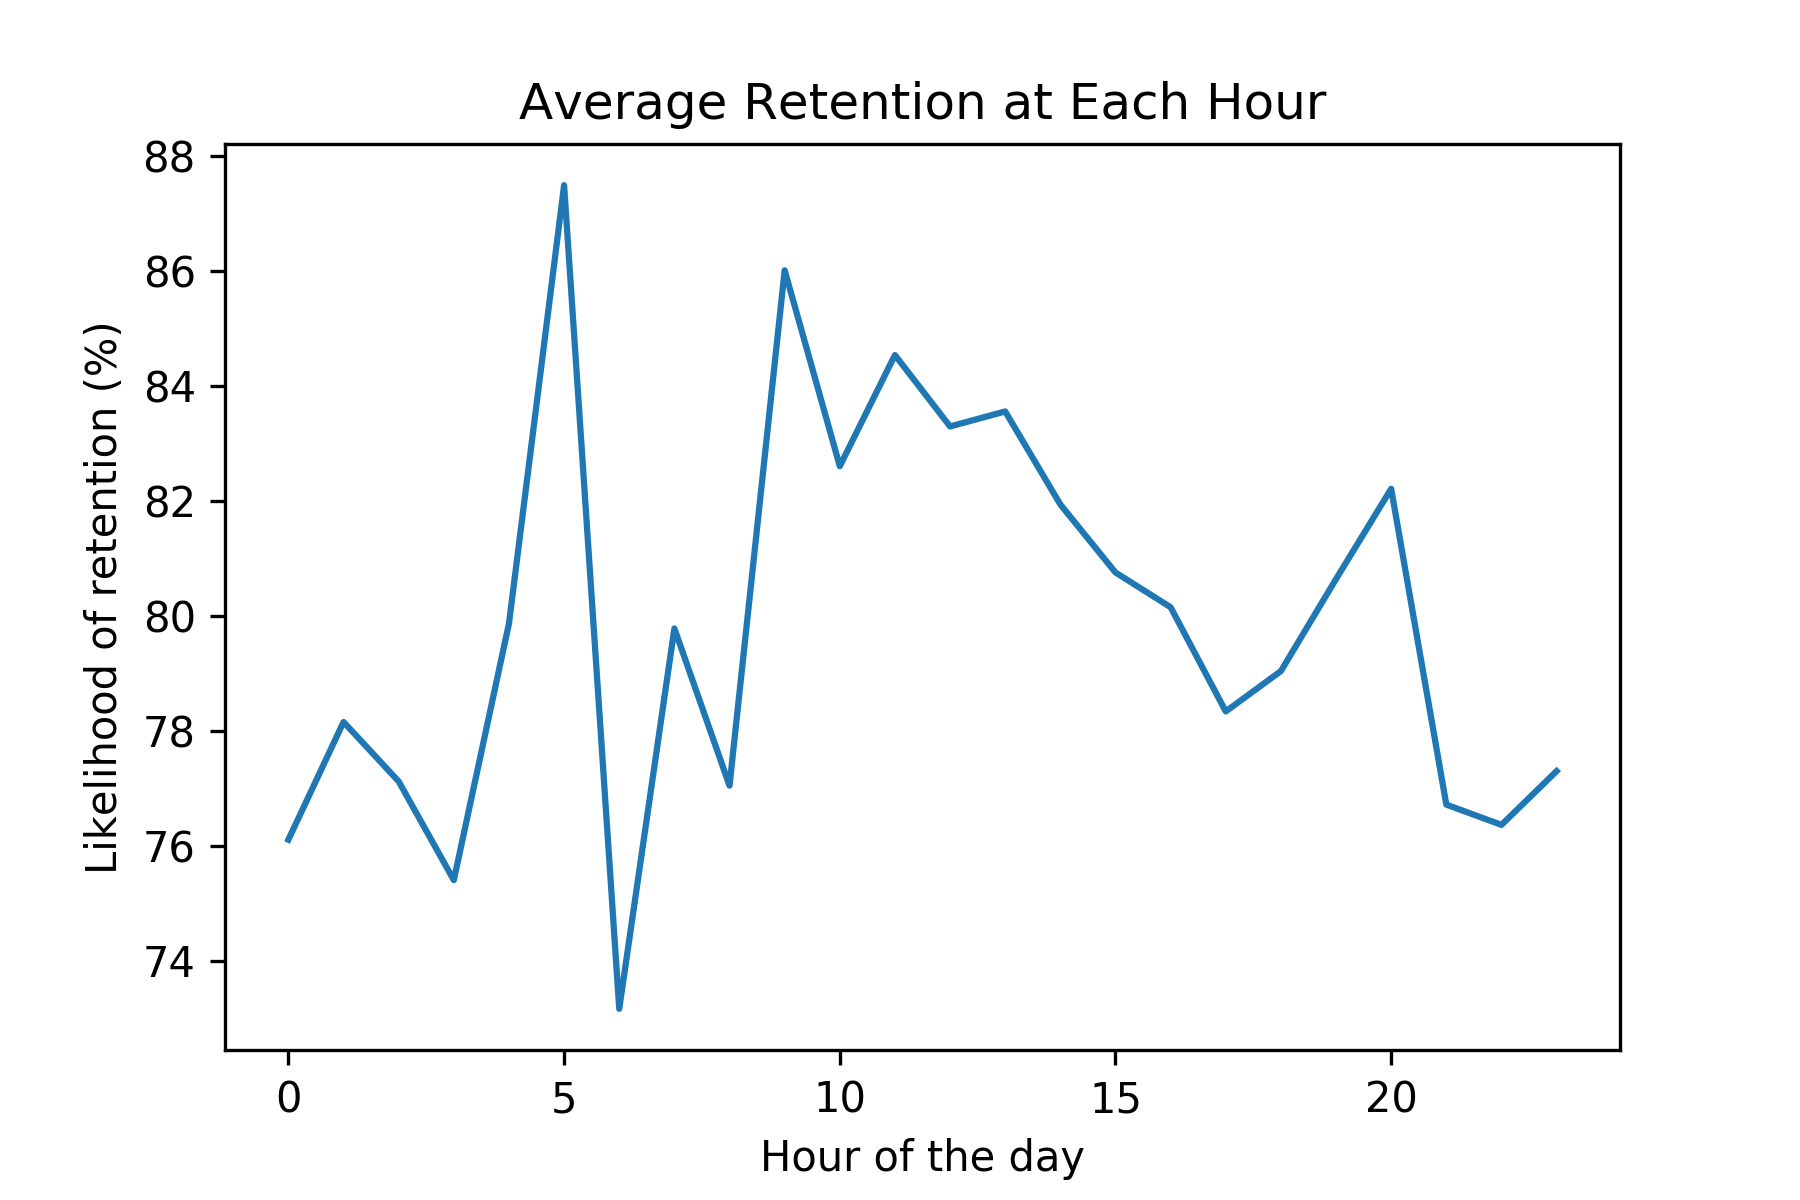 Histogram of retention versus hour of the day